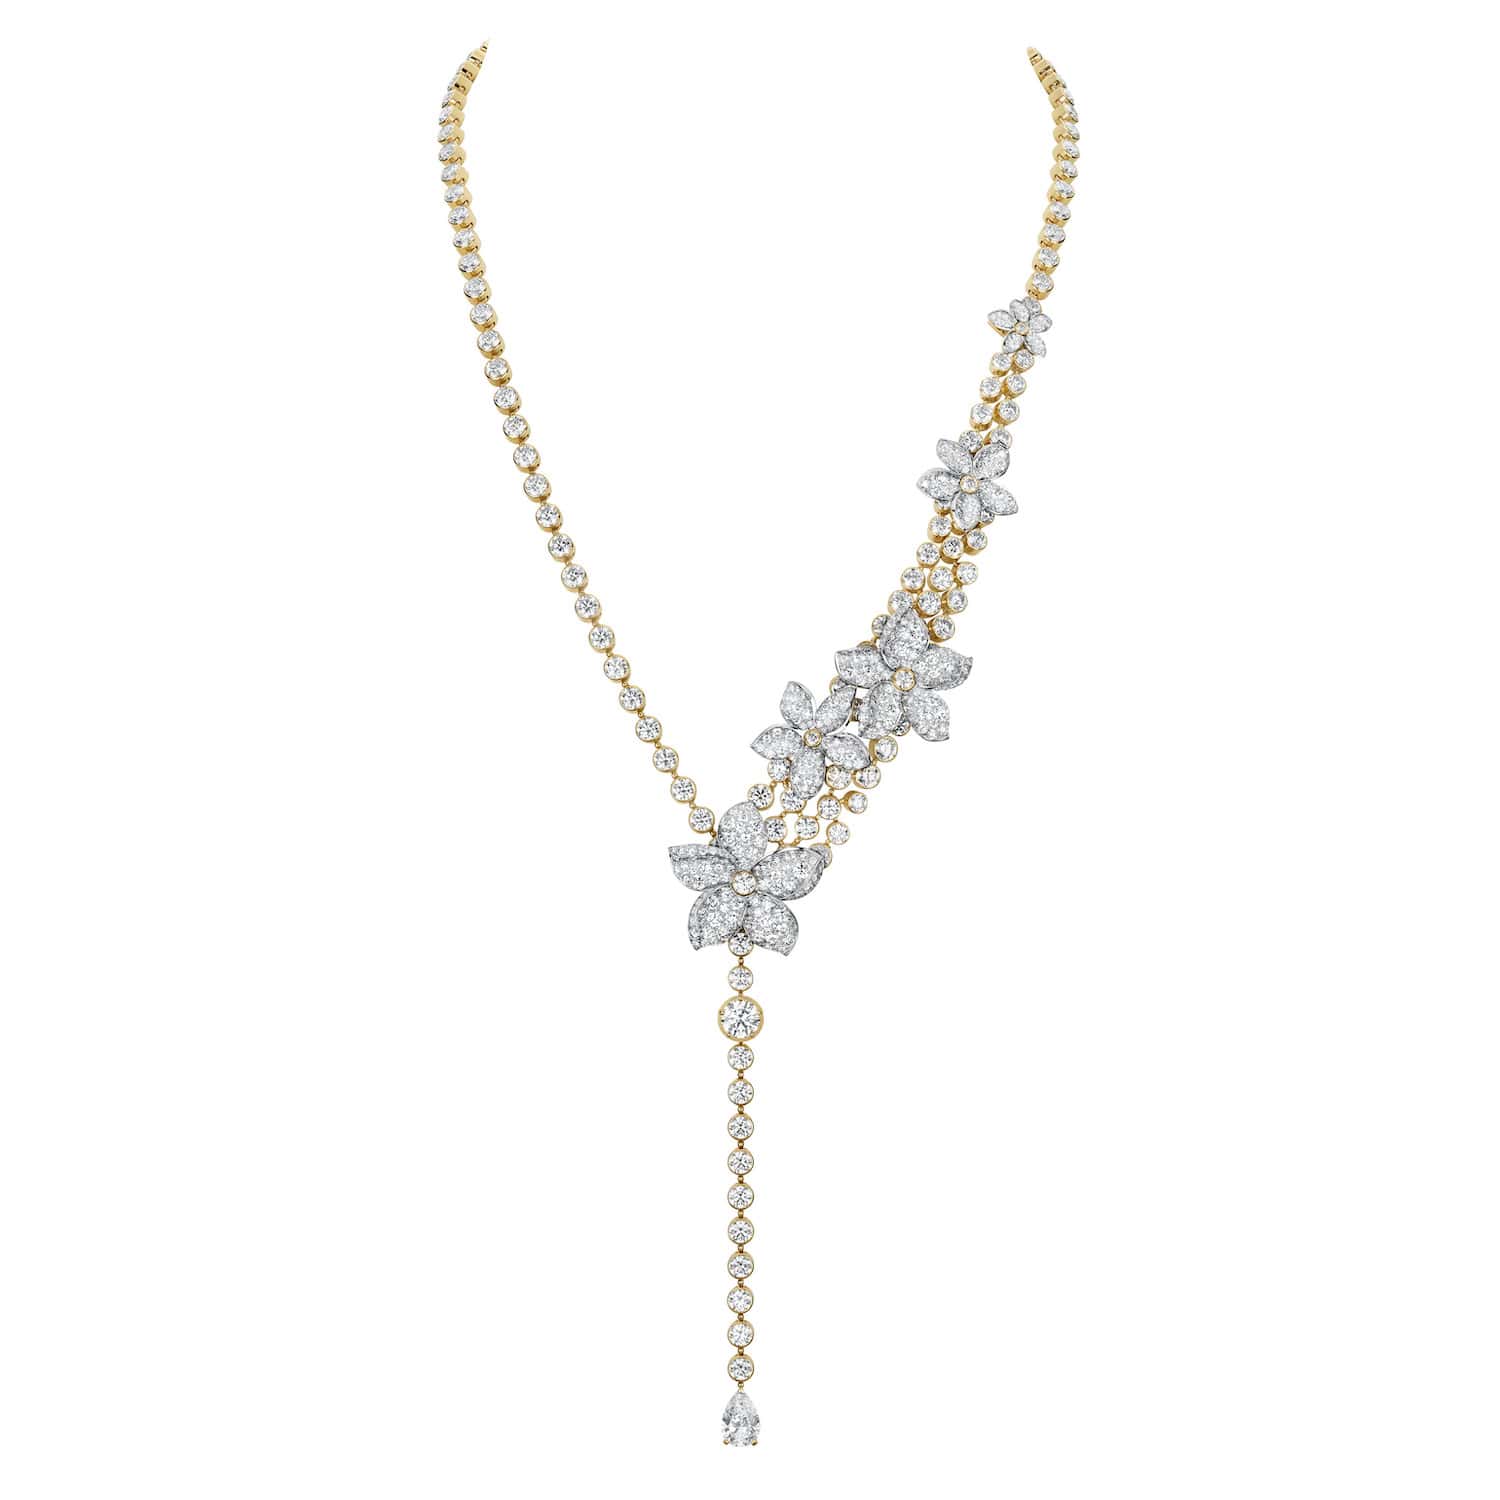 Chanel's 55.55-carat diamond necklace pays tribute to the No 5 perfume